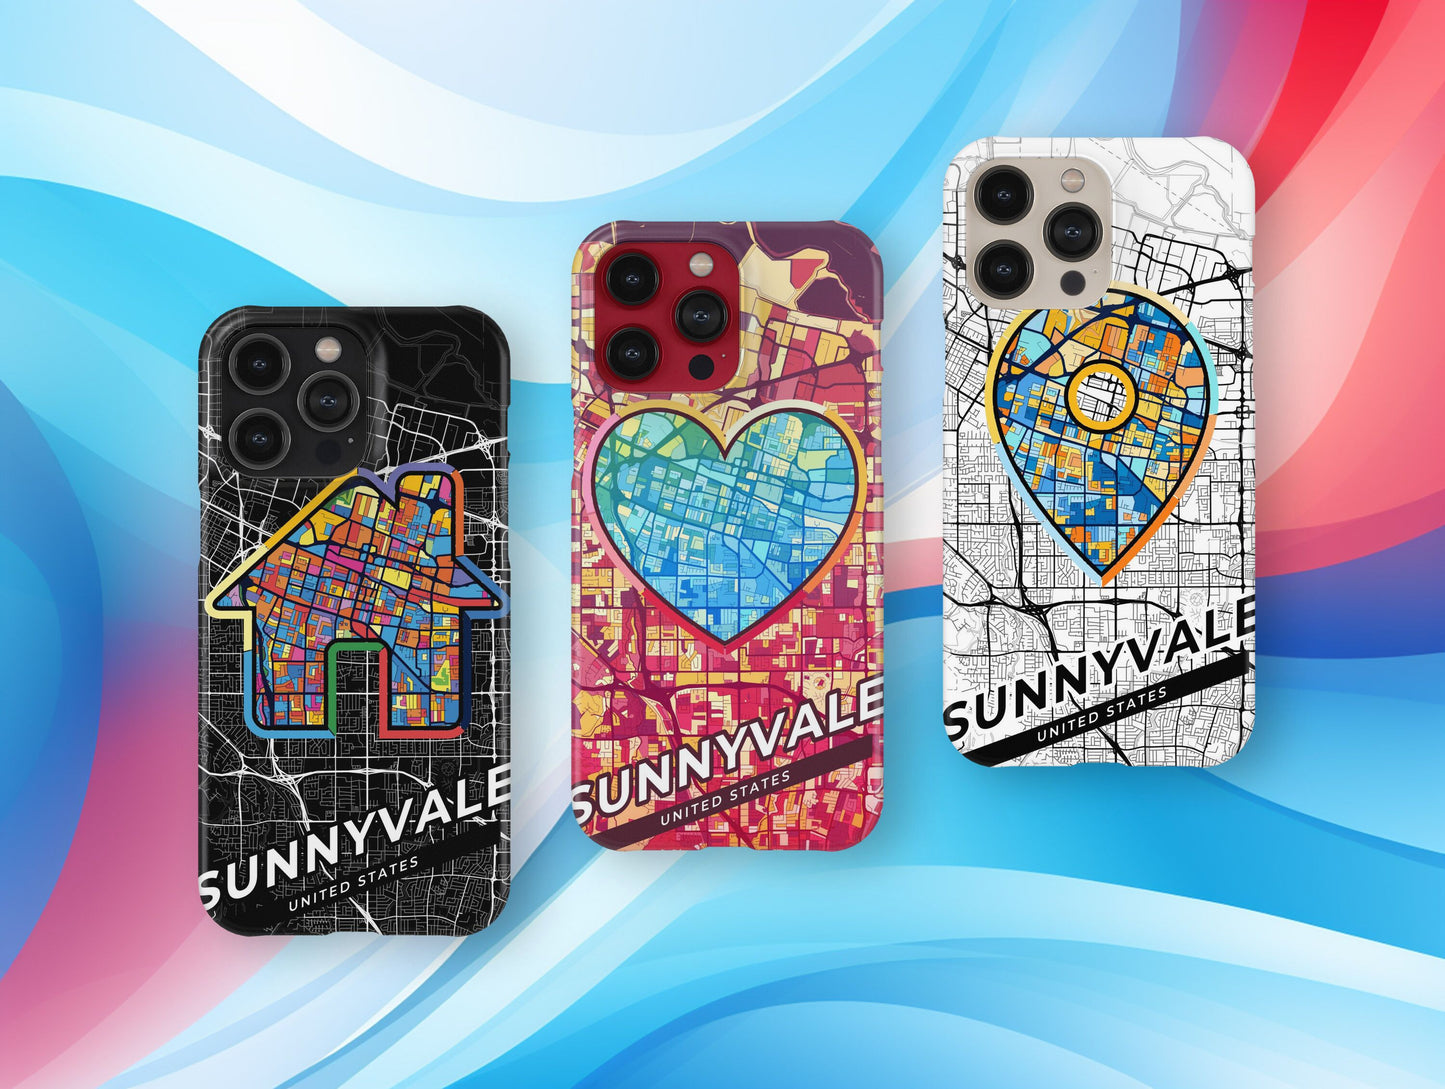 Sunnyvale California slim phone case with colorful icon